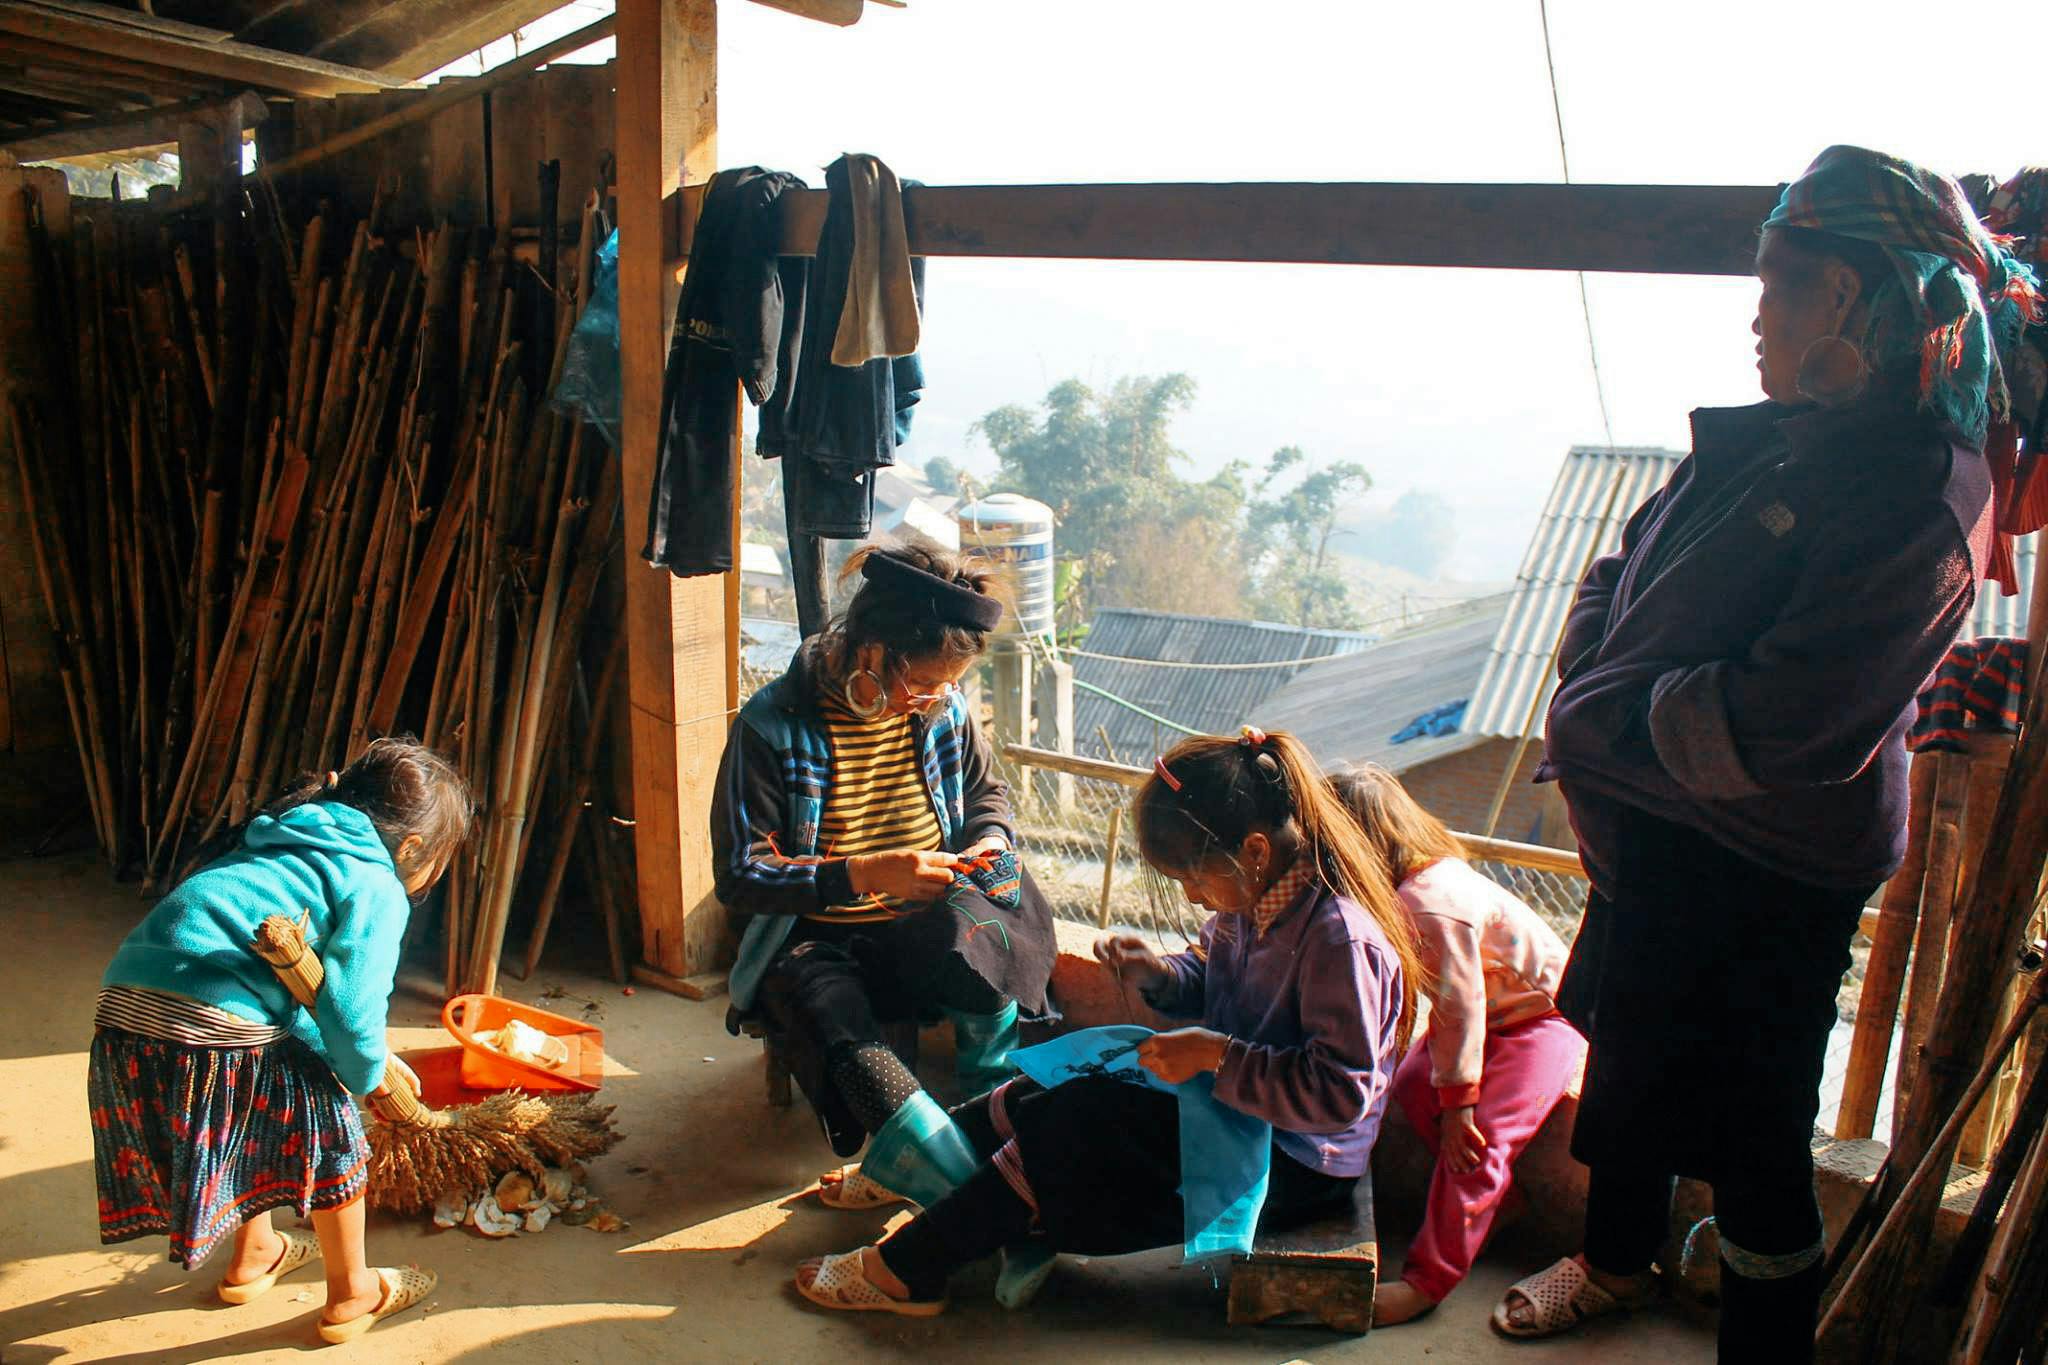 By supporting social enterprises in Sapa, you're directly supporting youth education and upskilling.